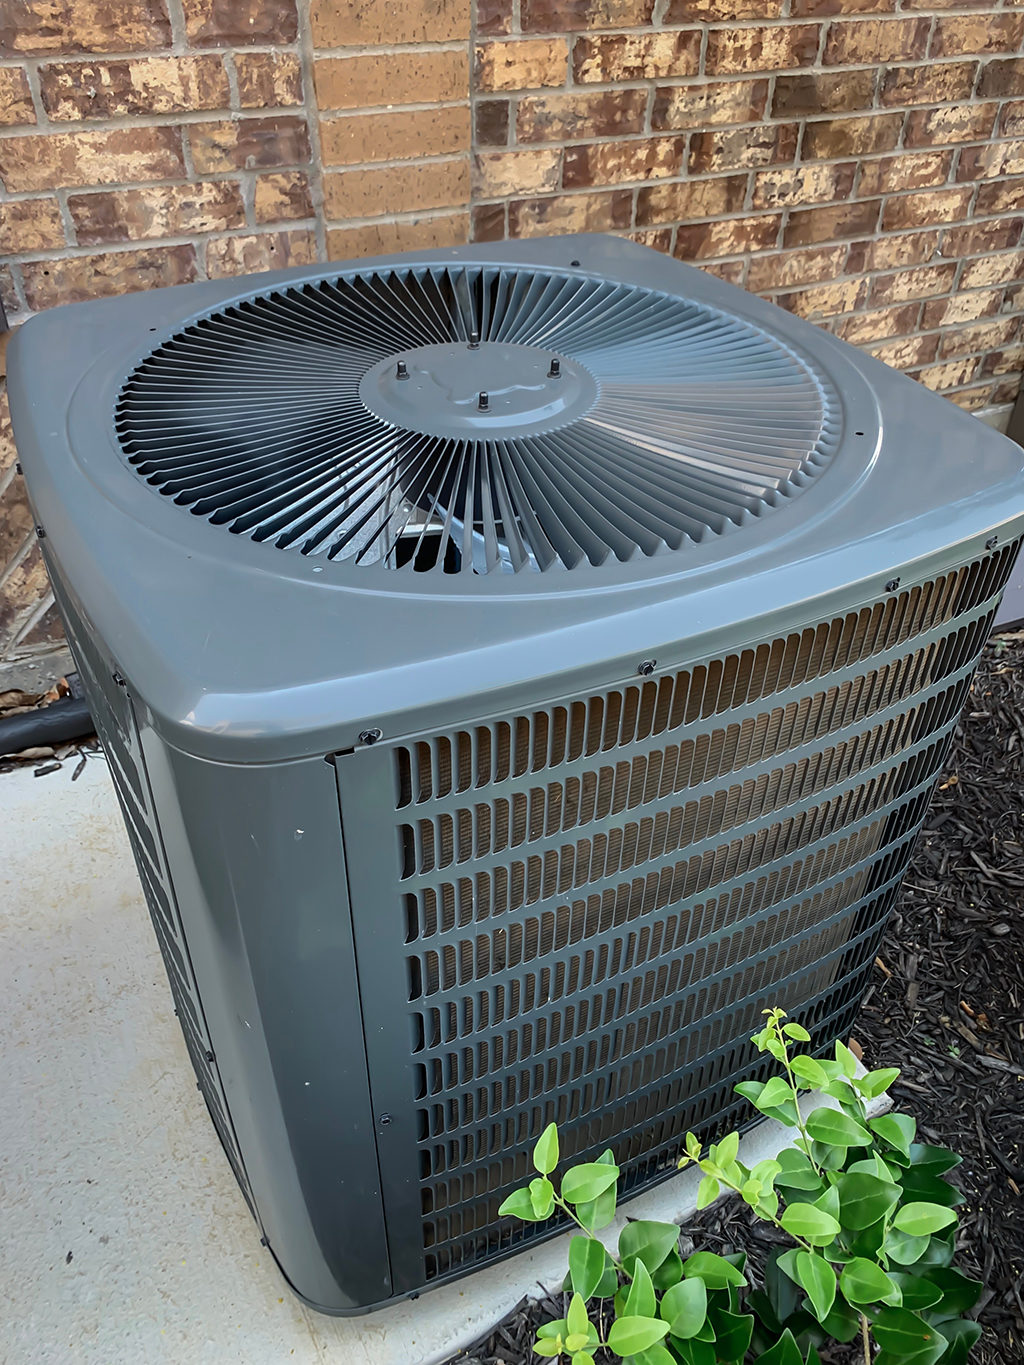 Reasons You Should Hire a Heating and AC Professional to Install Your HVAC Units | Dallas, TX